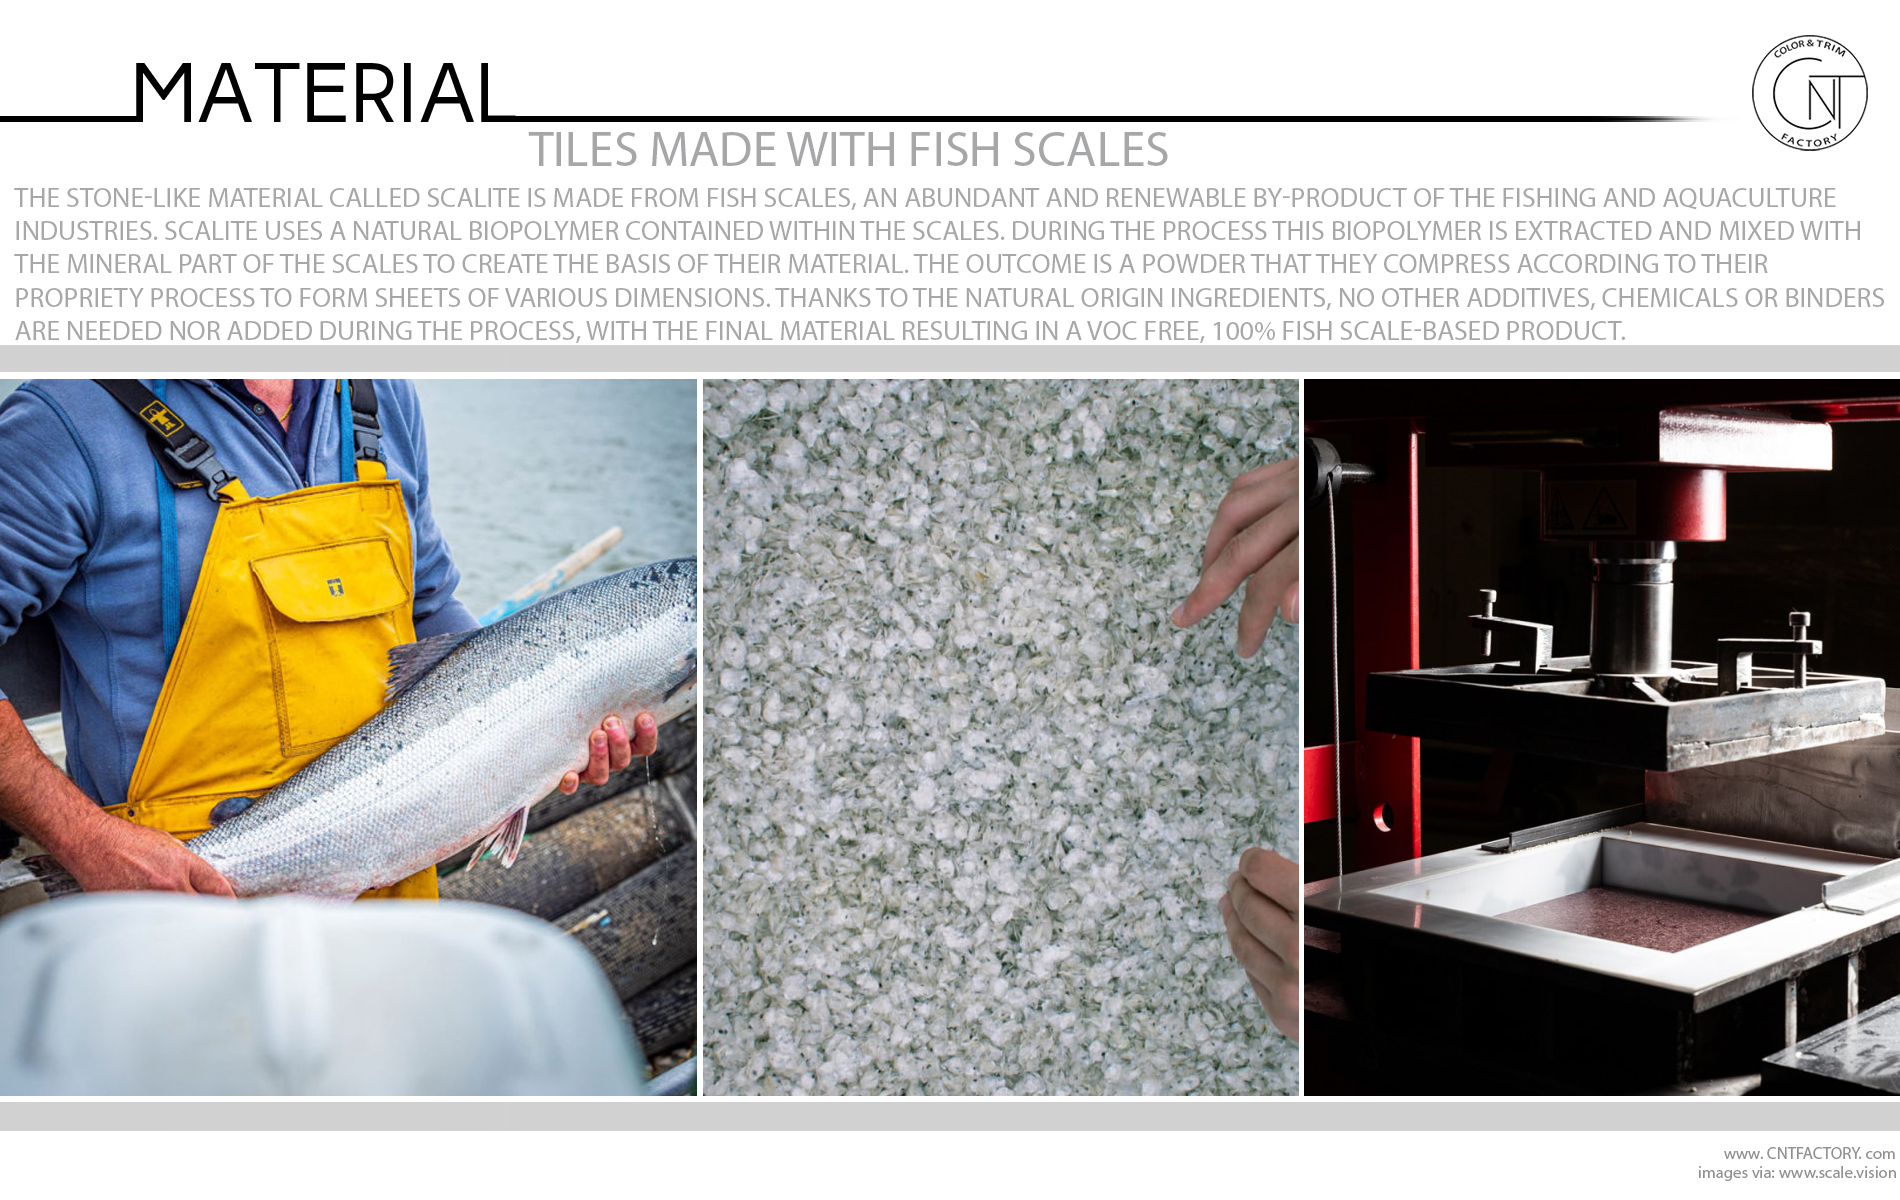 Scalite: a material made entirely of fish scales - DesignWanted :  DesignWanted